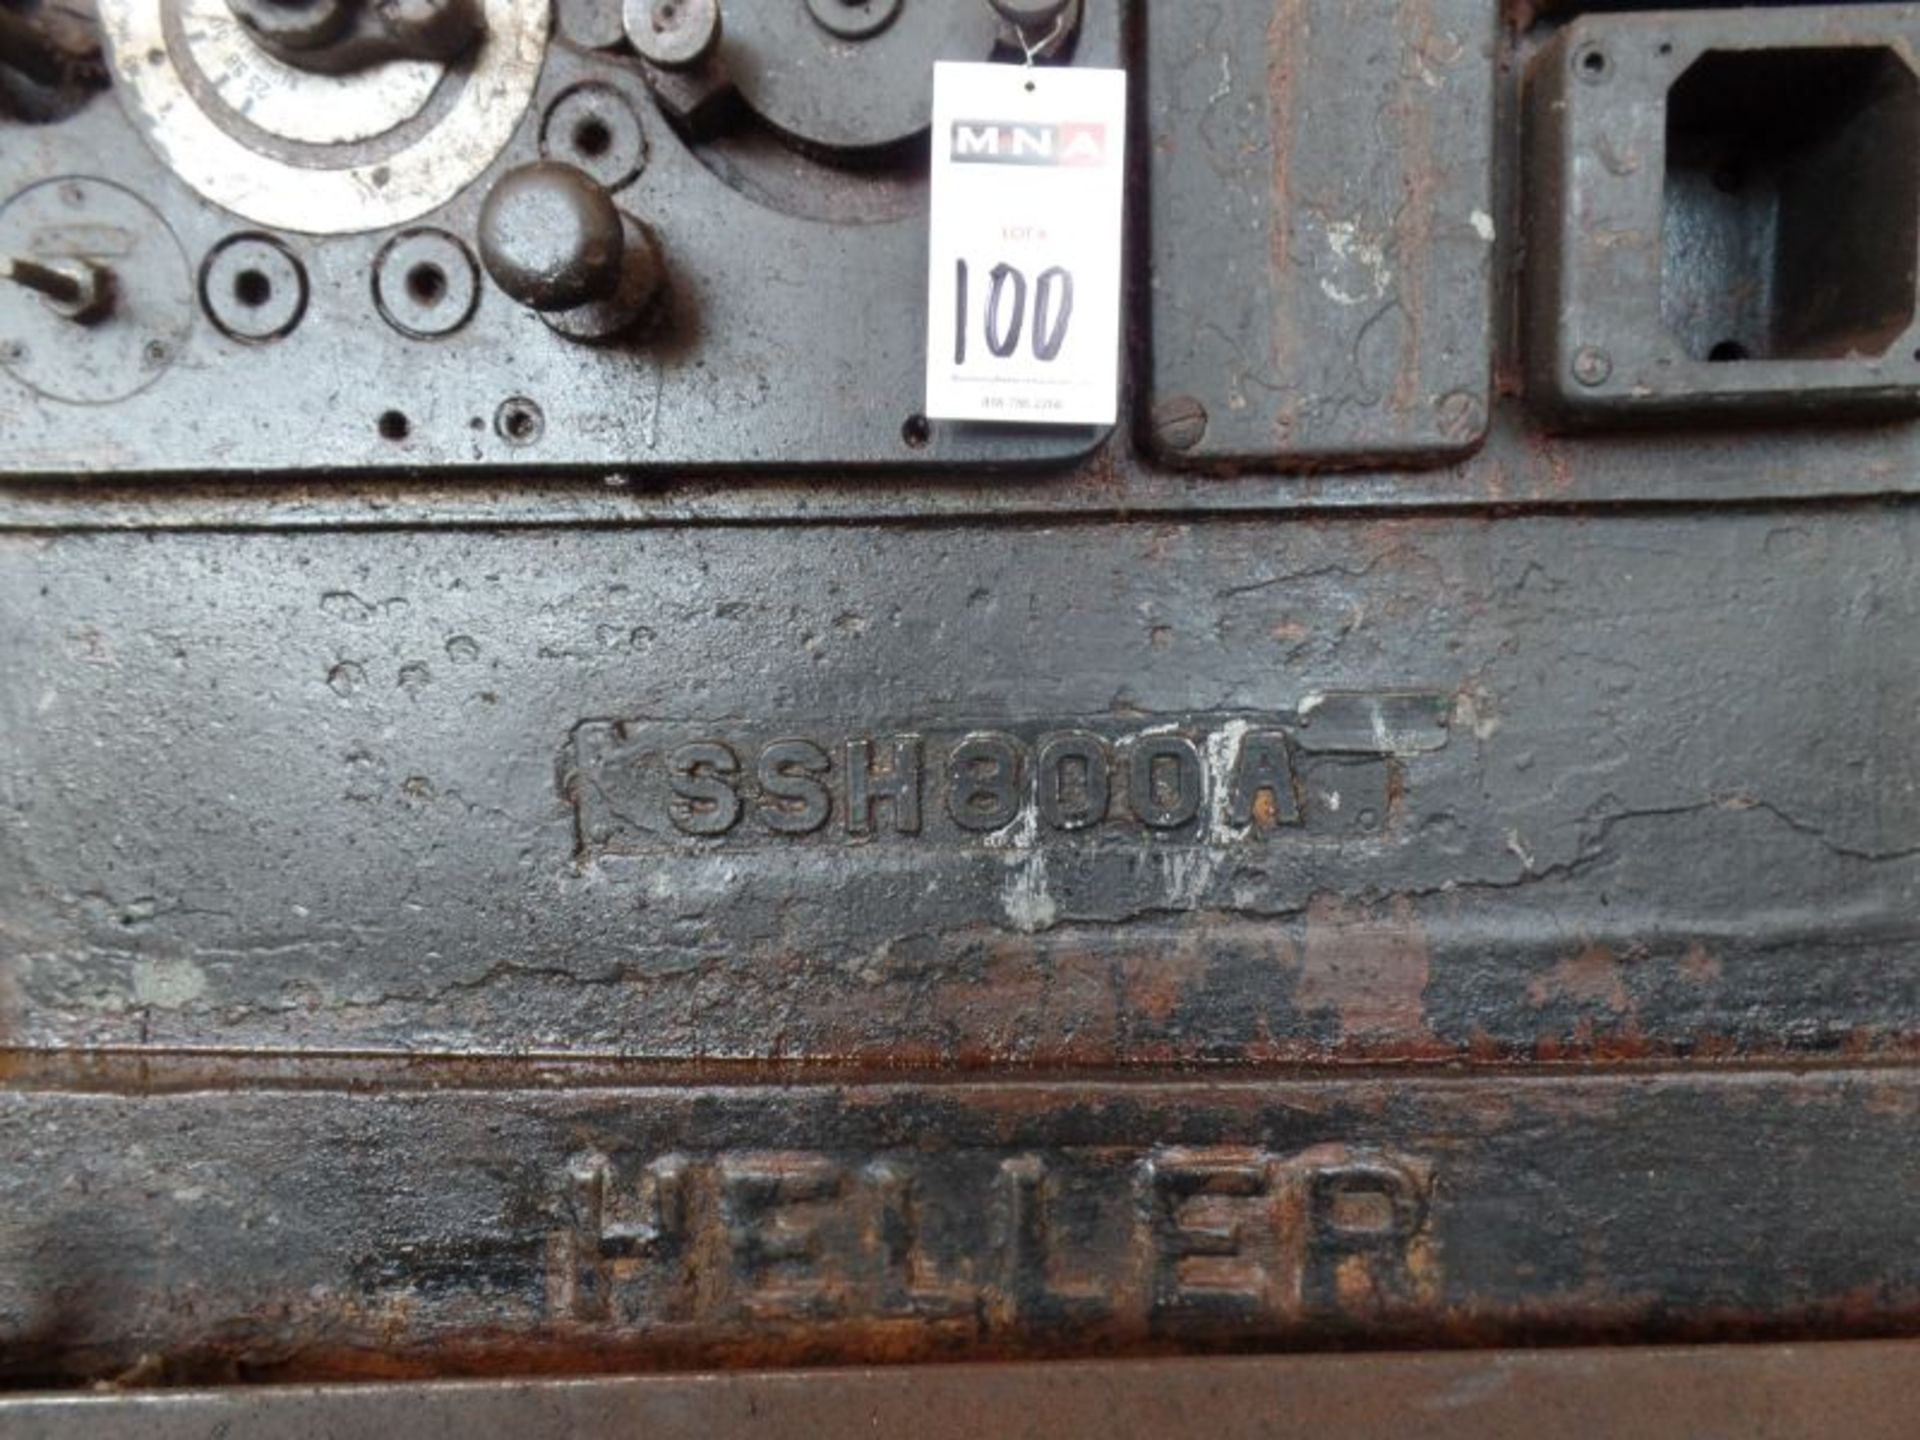 Heller SSH800A Saw - Image 7 of 7